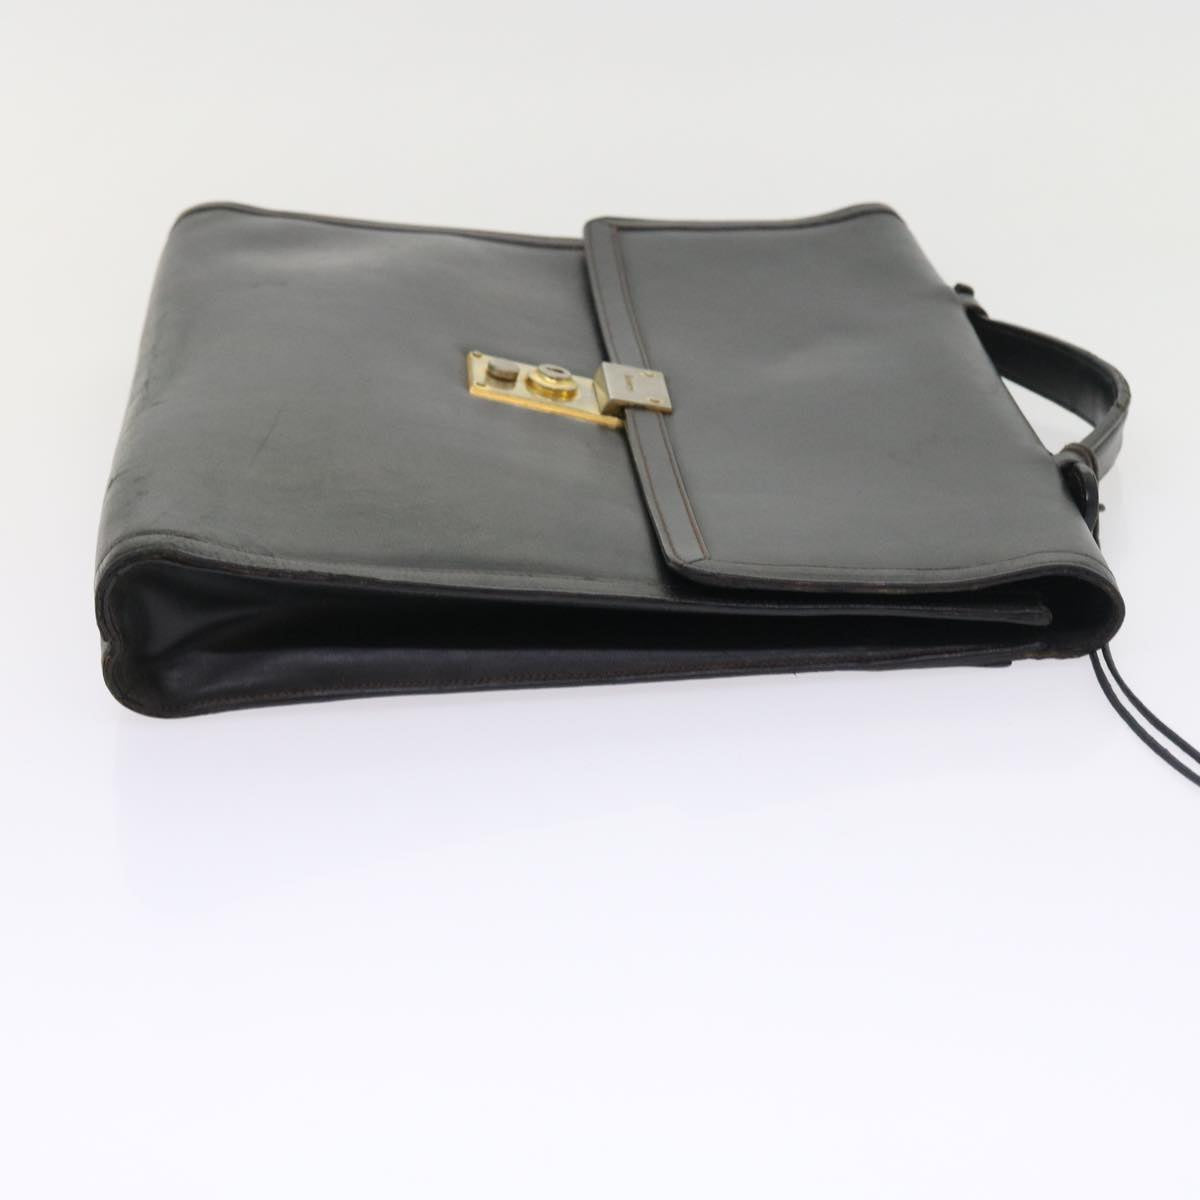 Burberrys Business Bag Leather Black Auth bs8731